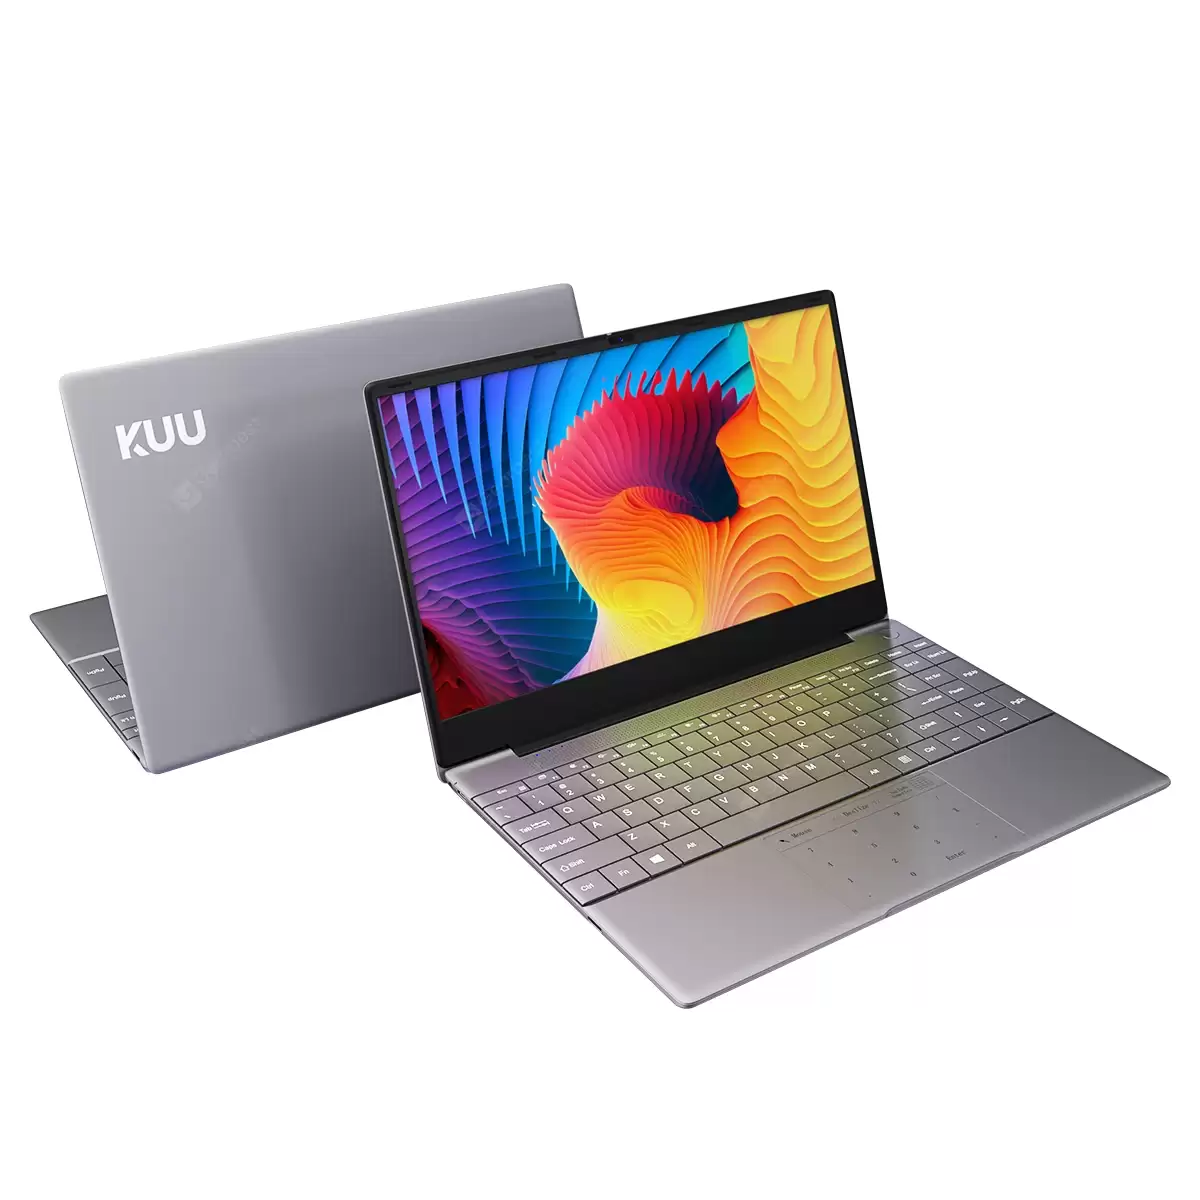 Order In Just $399.99 Kuu K2s Intel Celeron J4115 Processor 14.1-inch Ips Screen All Metal Shell Office Notebook 8gb Ram Windows 10 128gb/256gb/512gb Ssd - 256gb Germany At Gearbest With This Coupon